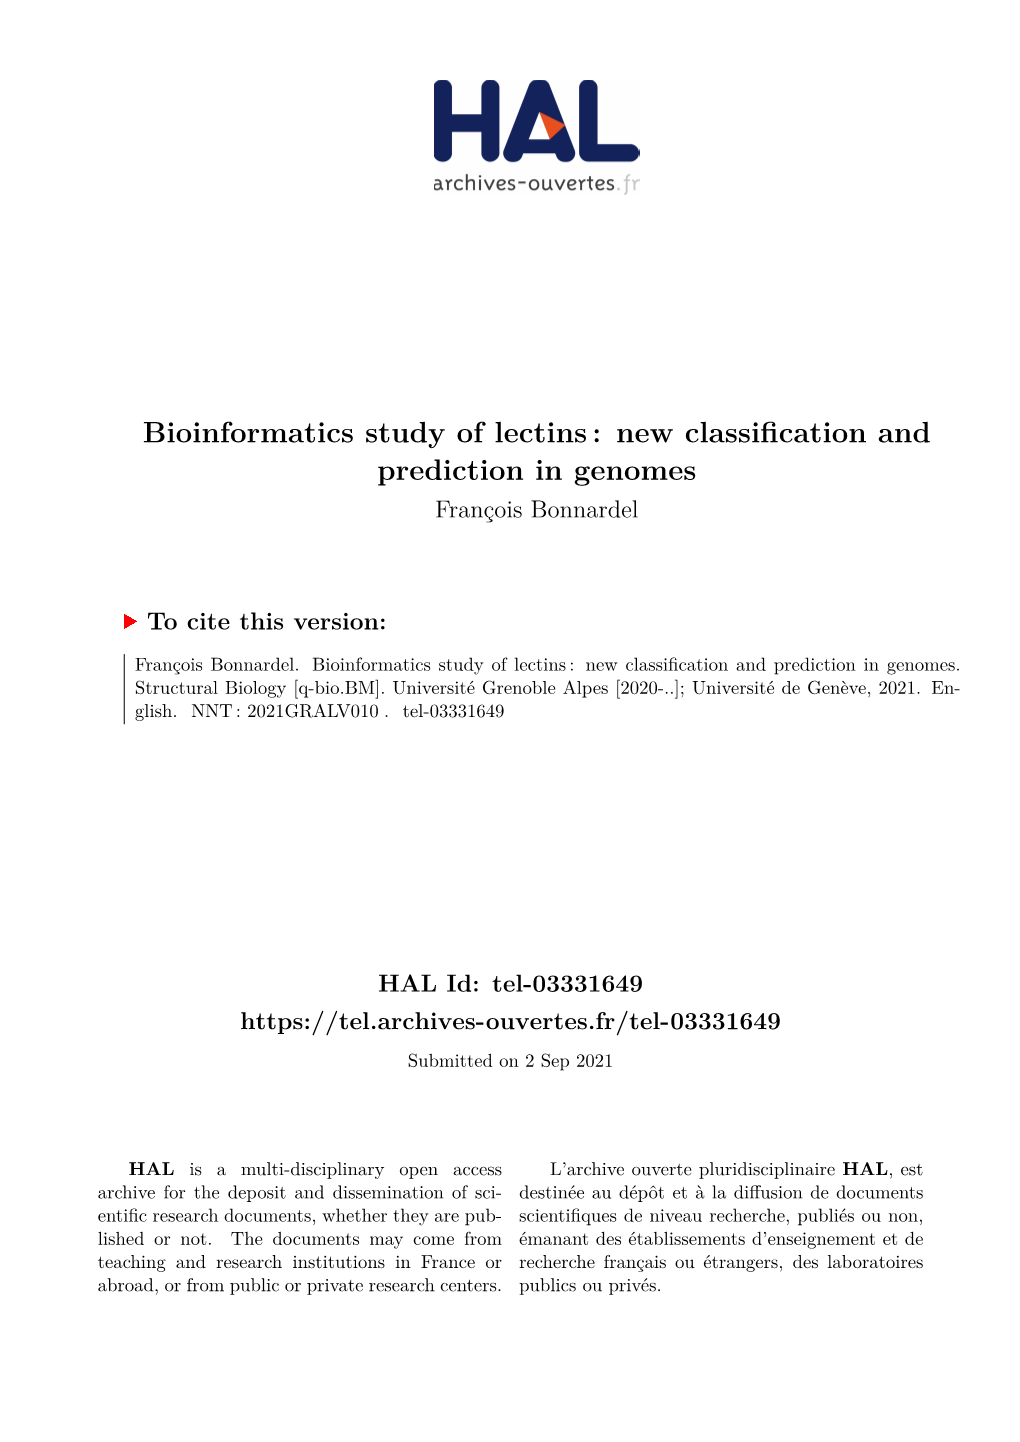 Bioinformatics Study of Lectins: New Classification and Prediction In